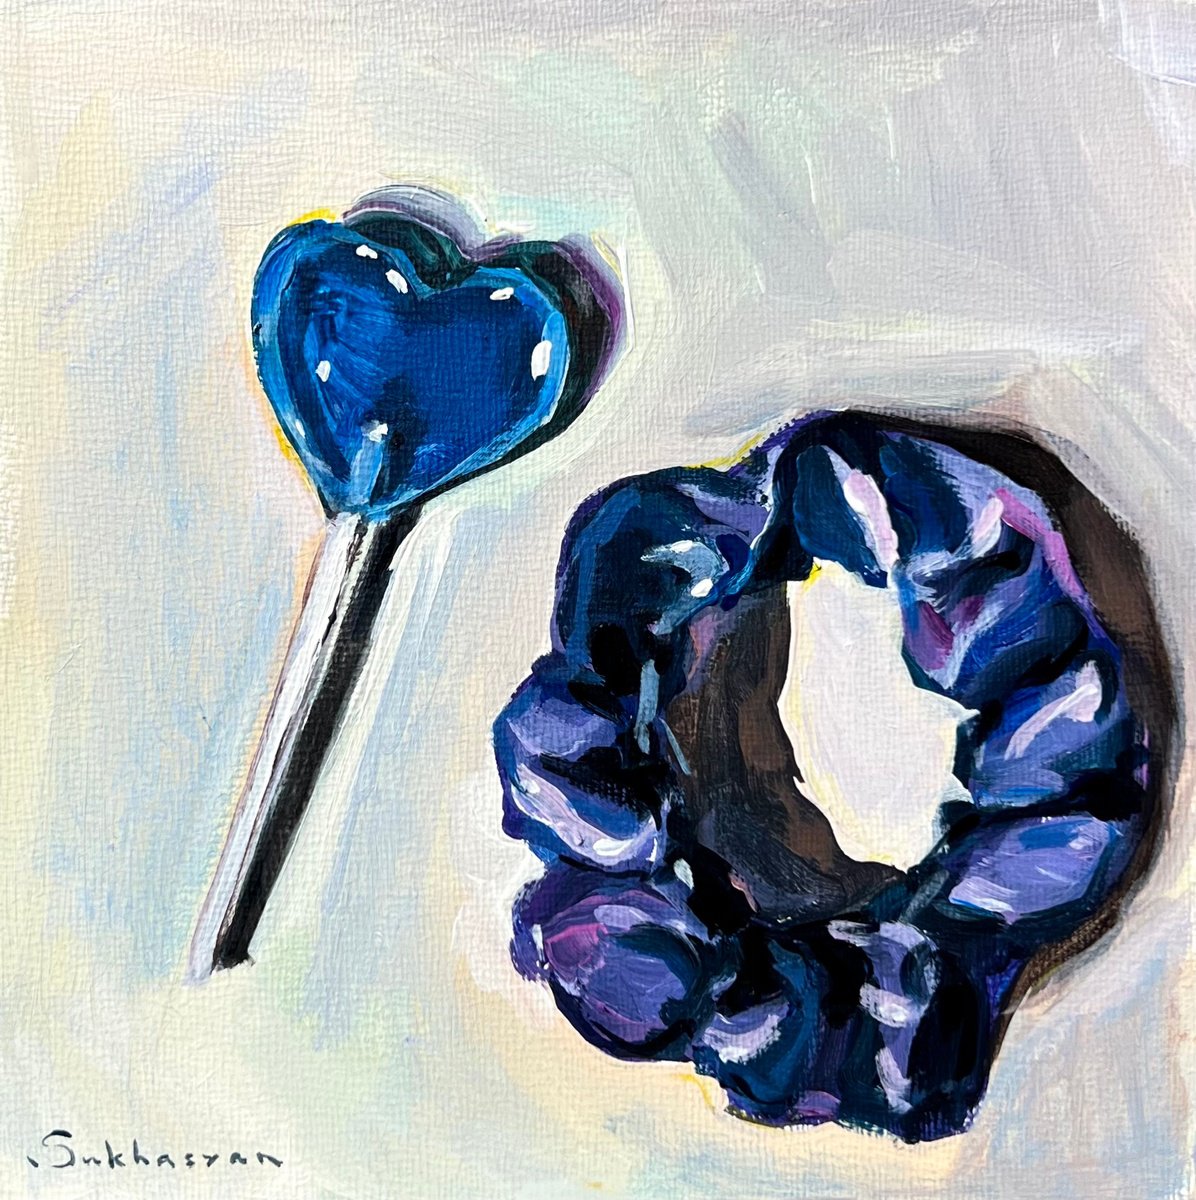 Still Life with Blue Lollypop and Hair Tie by Victoria Sukhasyan